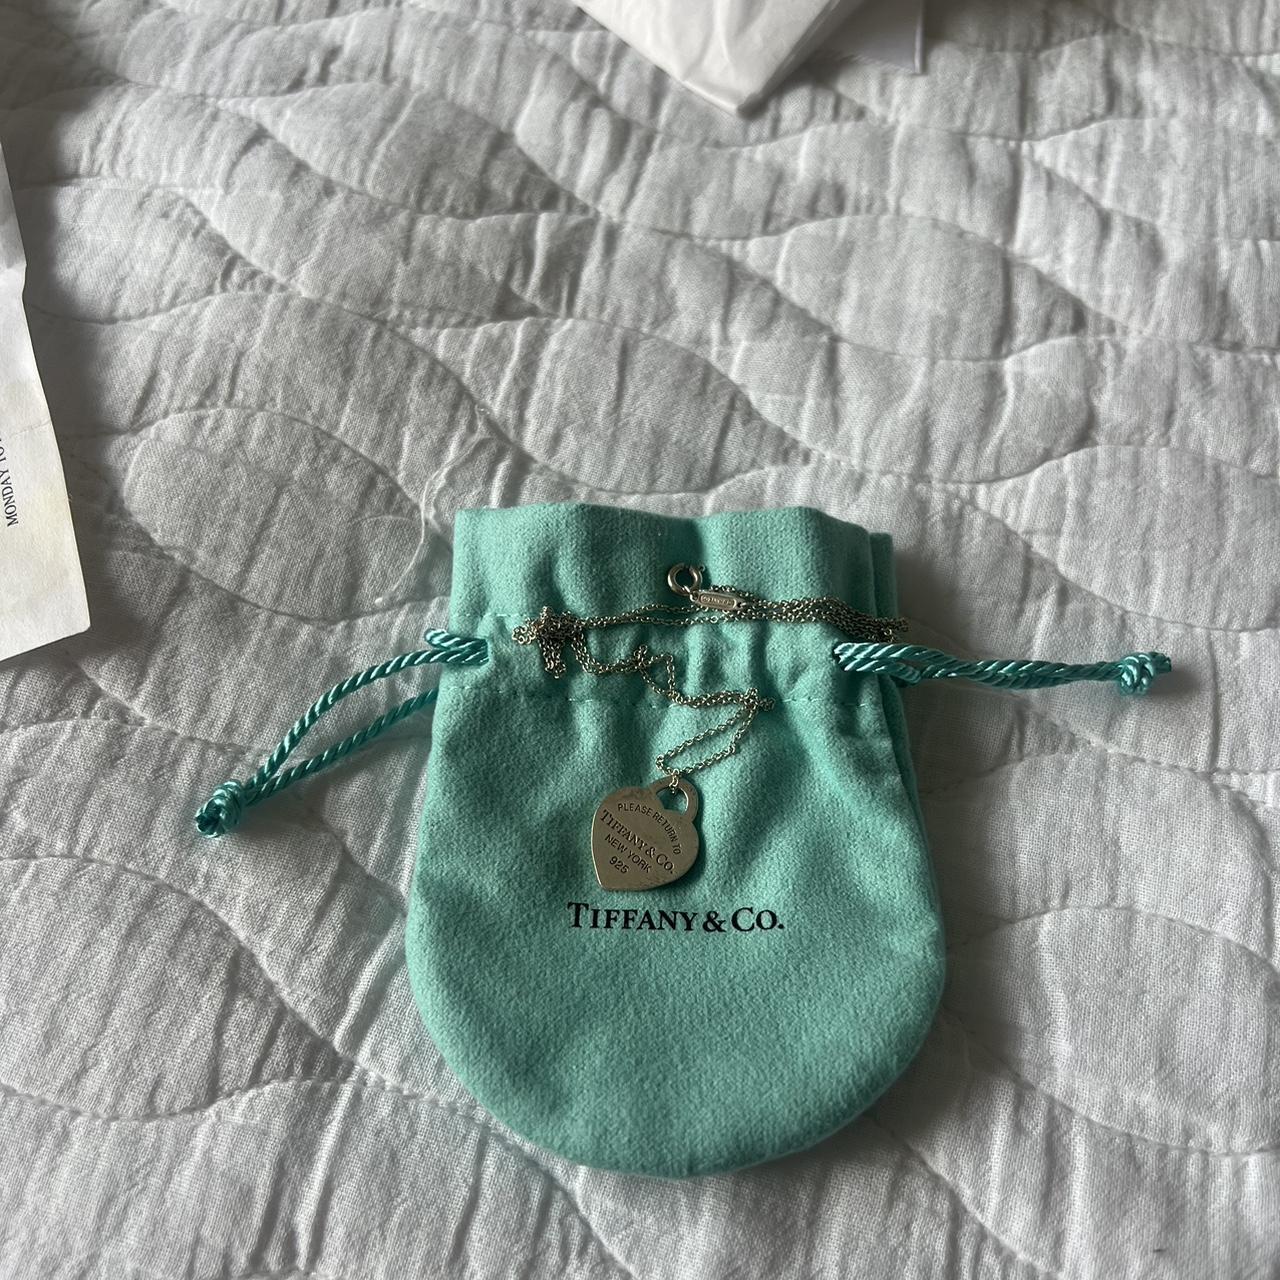 Authentic Tiffany and co necklace. Needs a good... - Depop